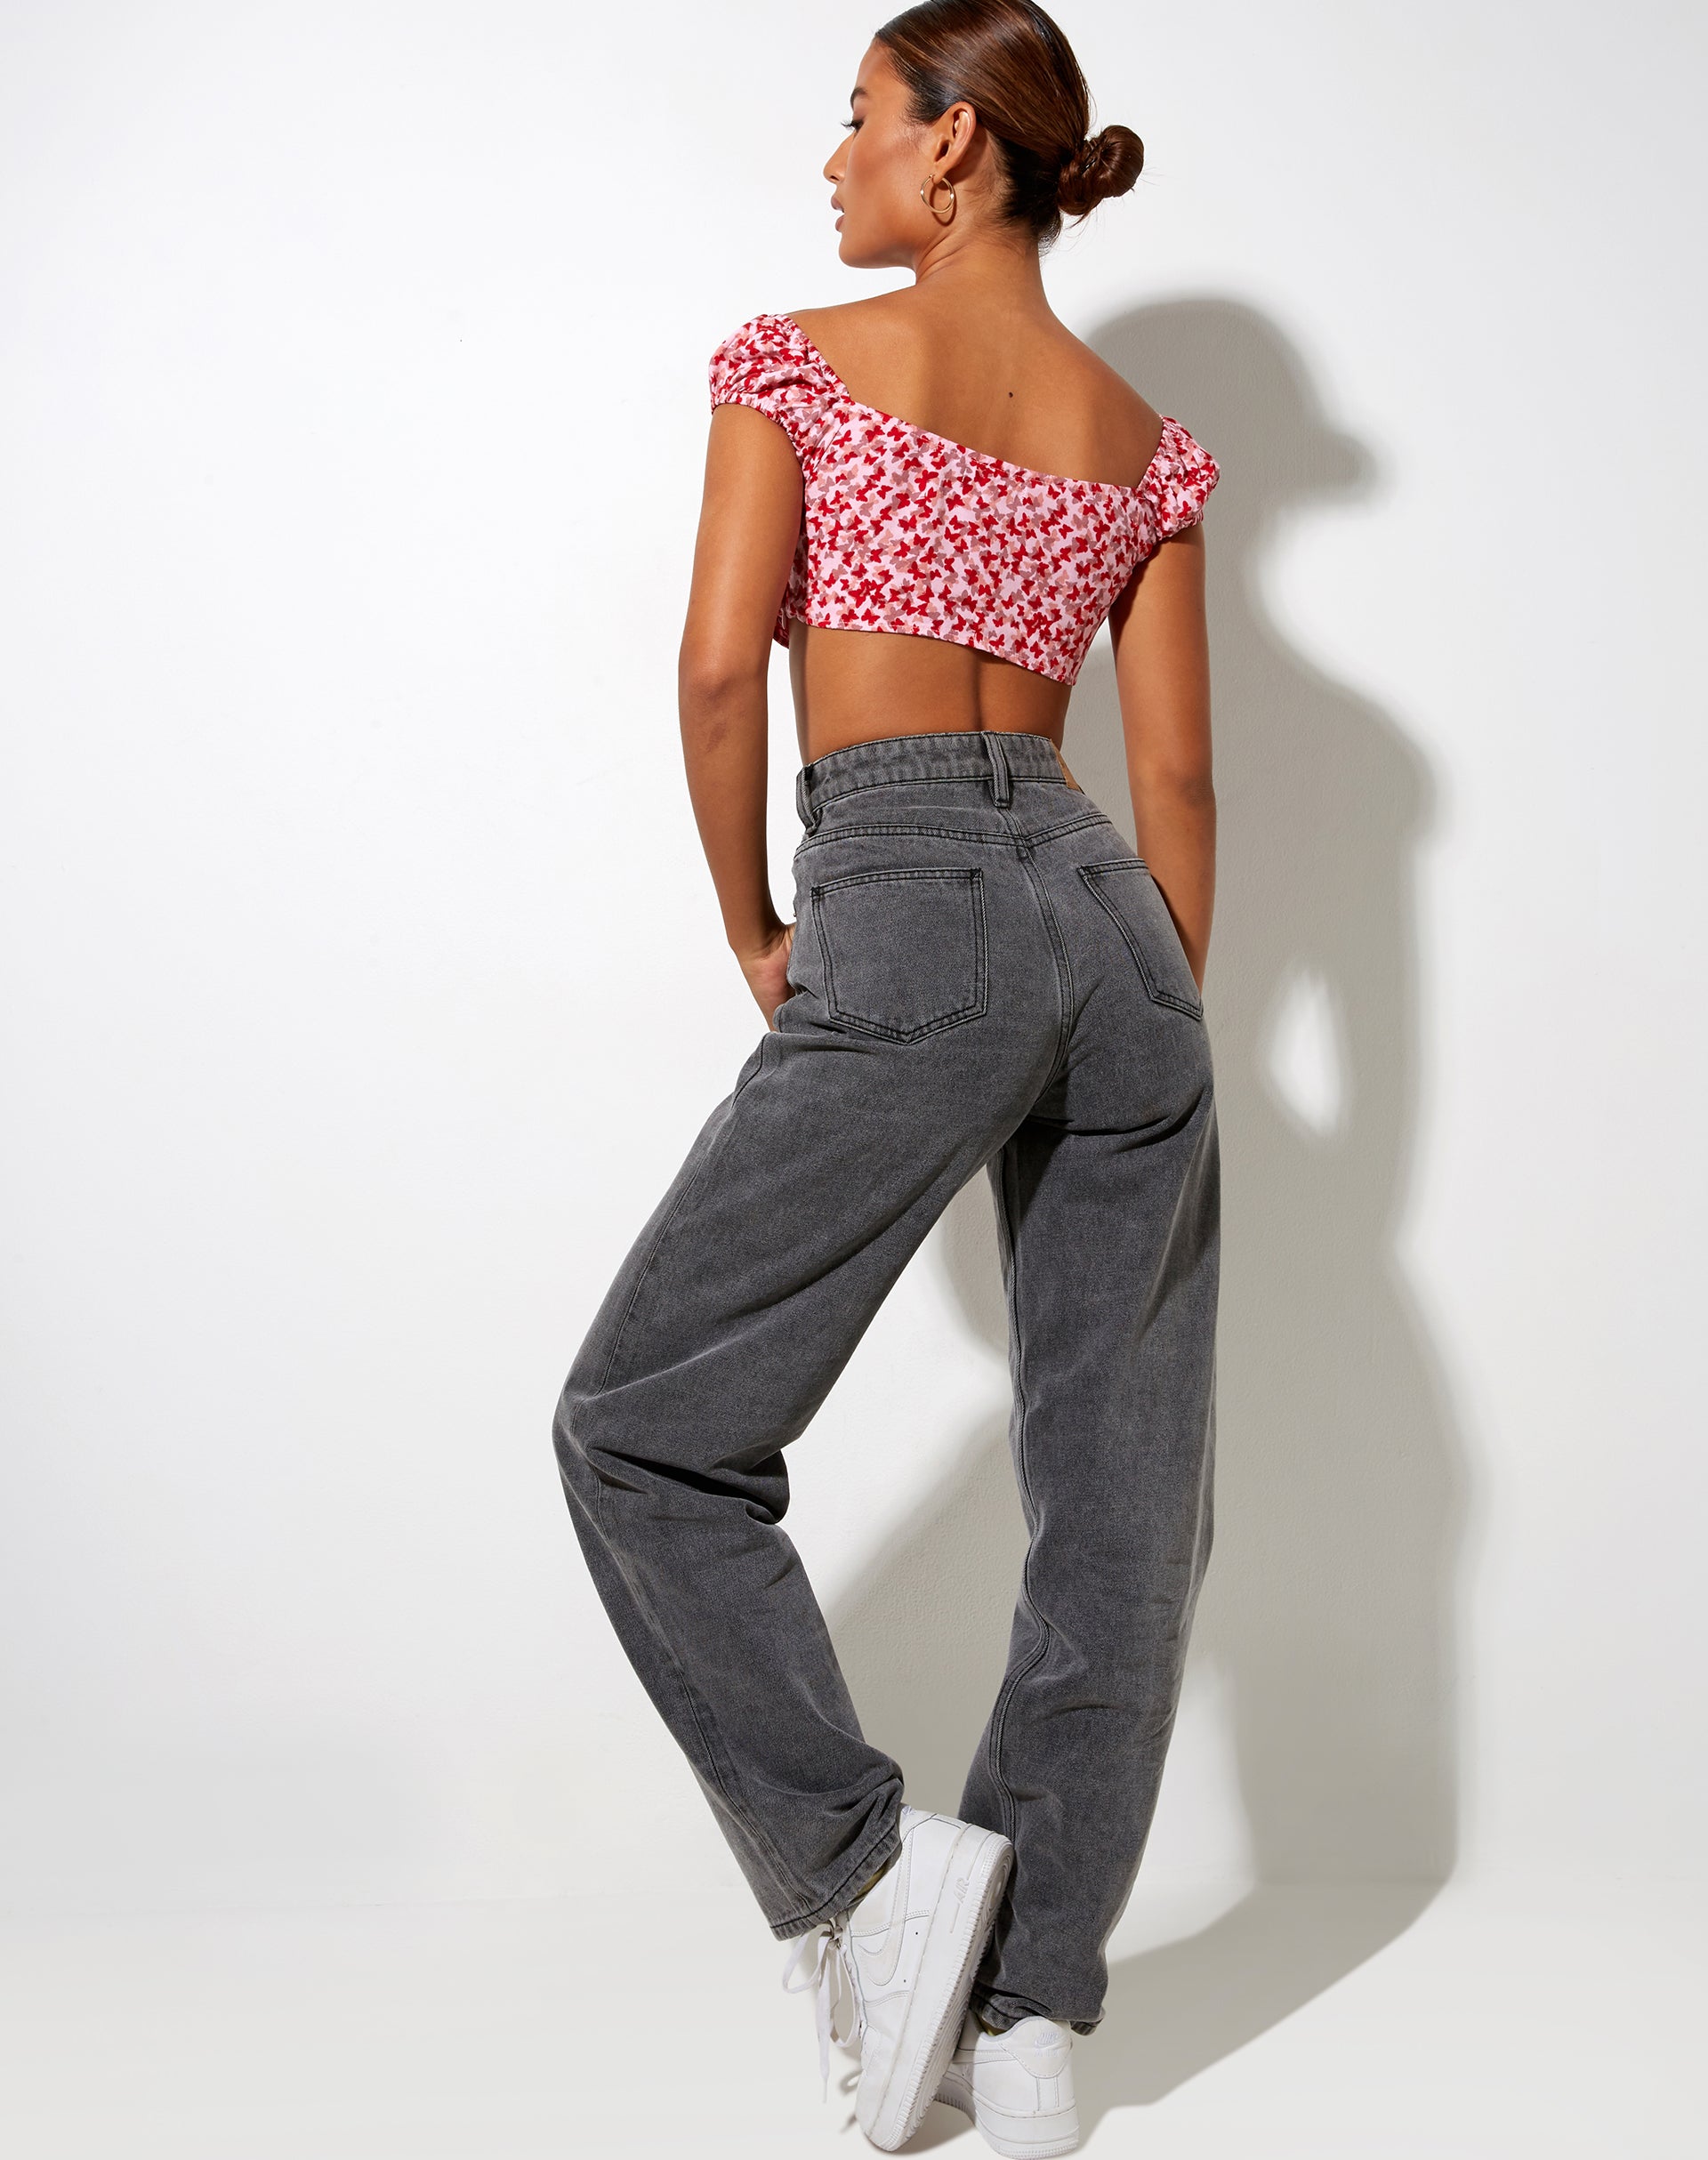 Image of Sarae Crop Top in Ditsy Butterfly Peach and Red